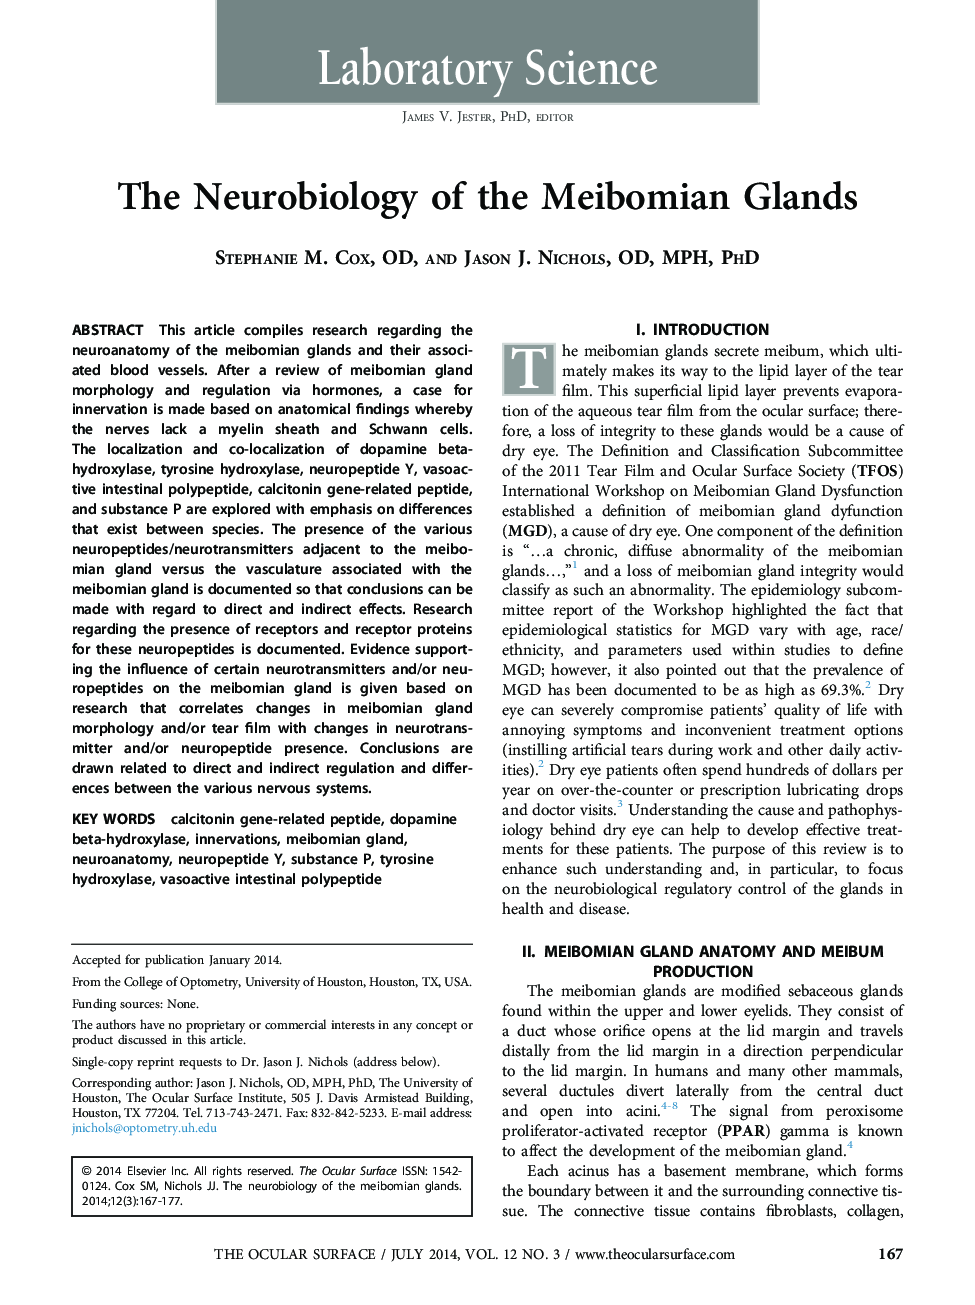 The Neurobiology of the Meibomian Glands 